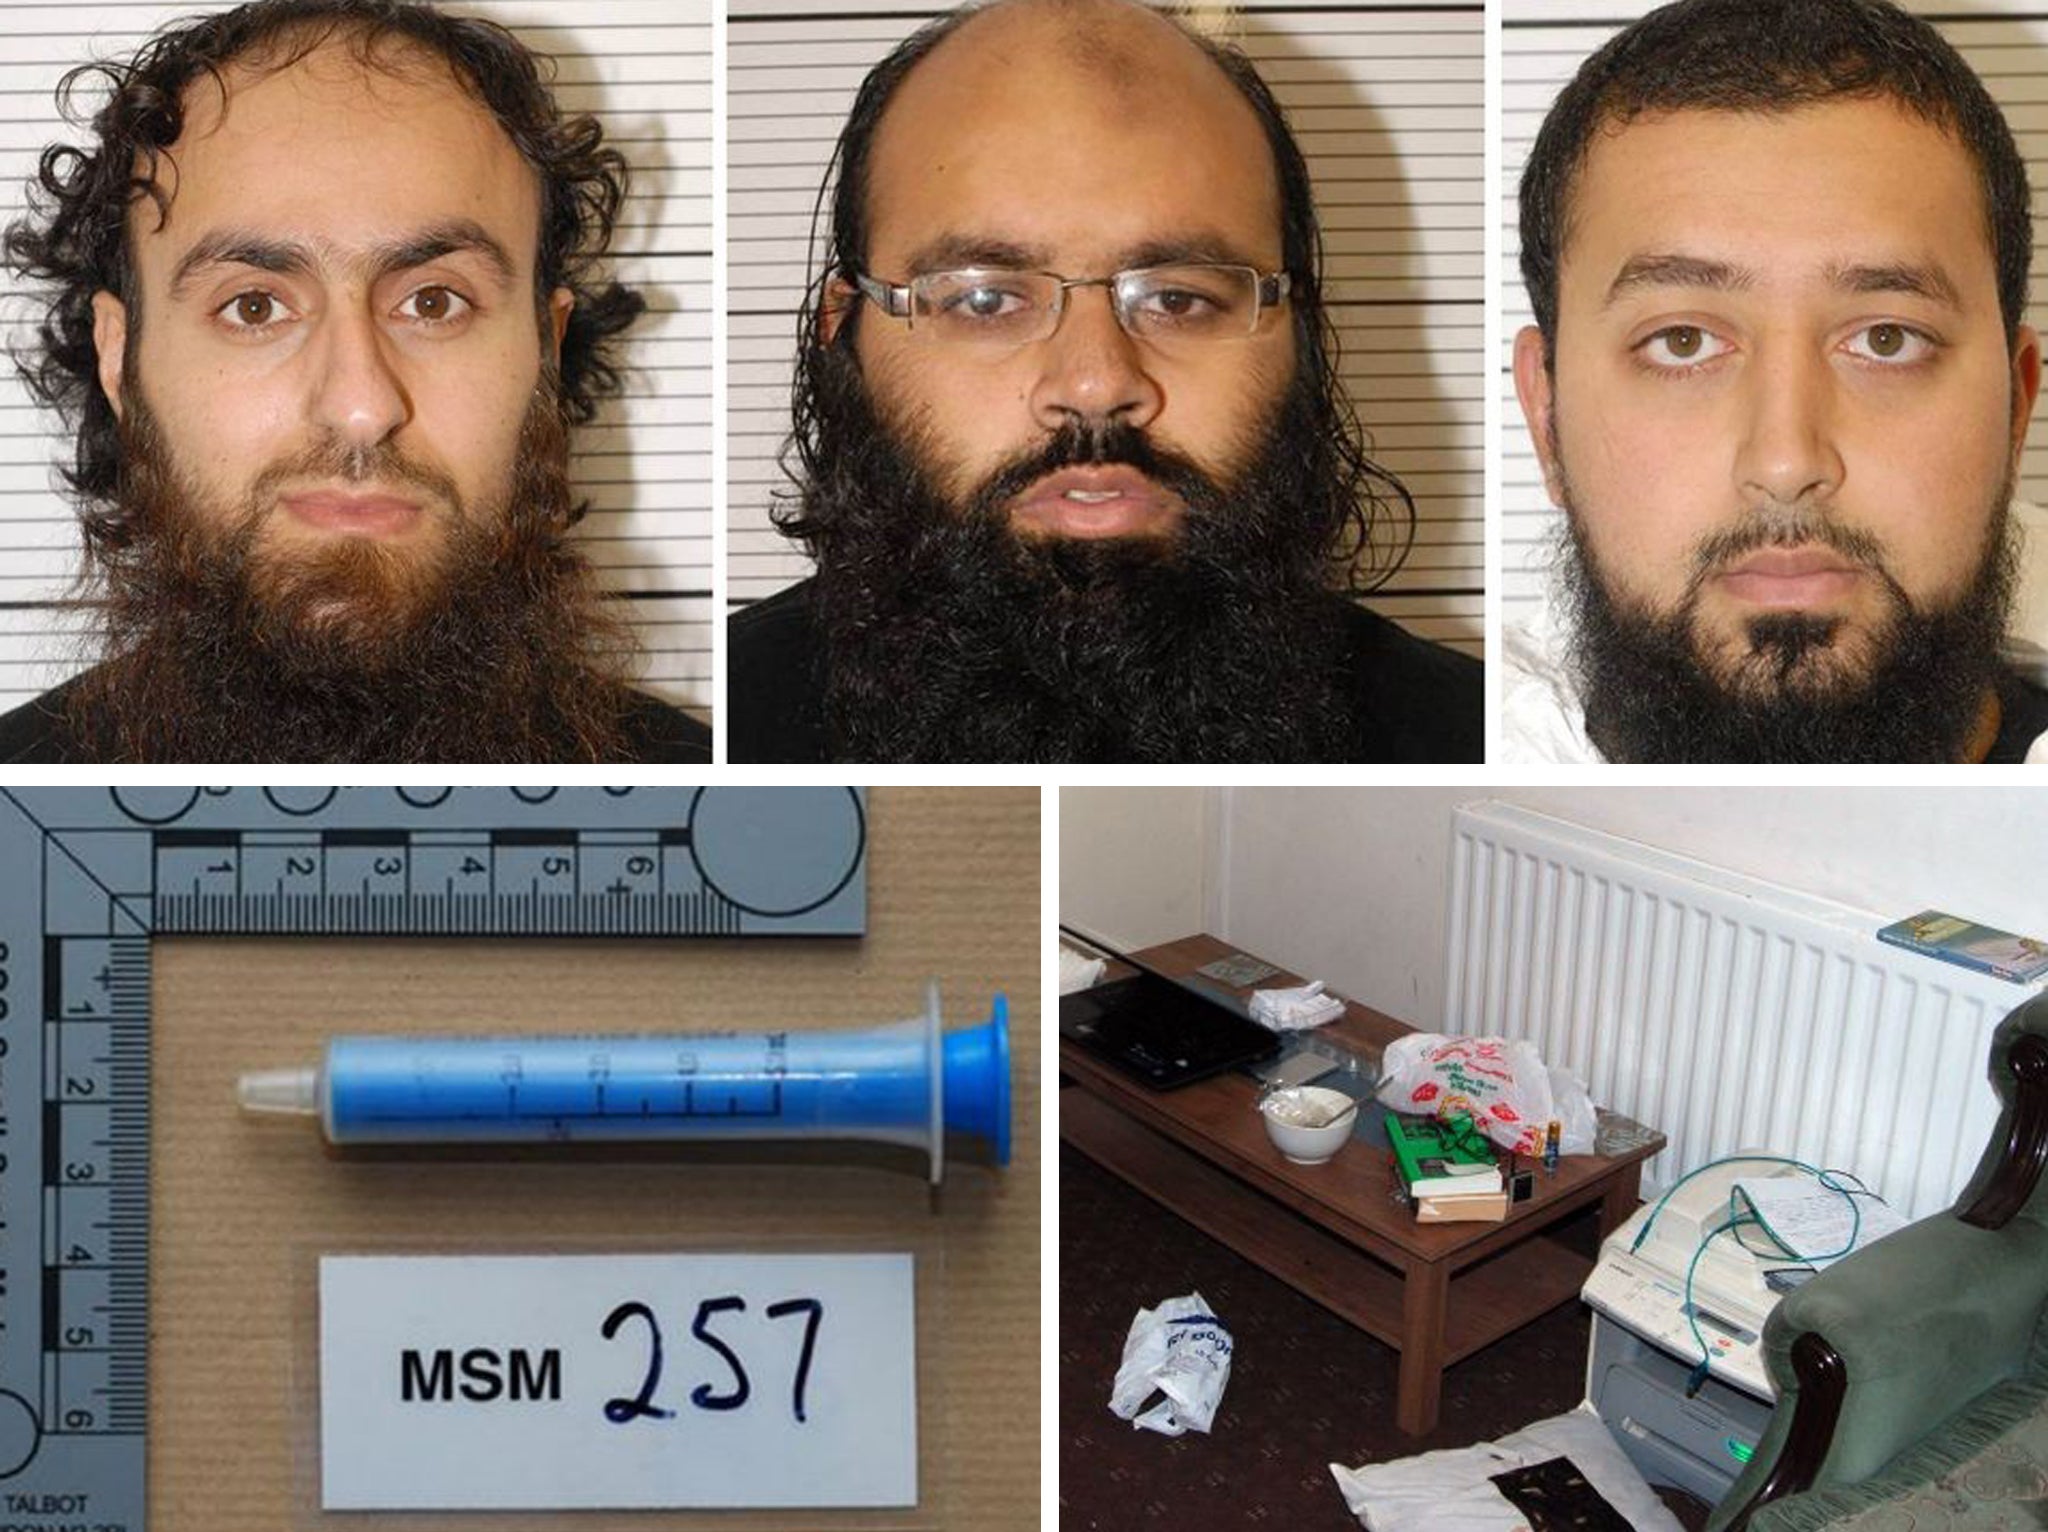 Irfan Khalid (left), Irfan Naseer and Ashik Ali, all from Birmingham, who were found guilty at Woolwich Crown Court of being "central figures" in a terrorist bomb plot. Bottom left: a syringe found in the safe house in White Street, Birmingham. Bottom rig